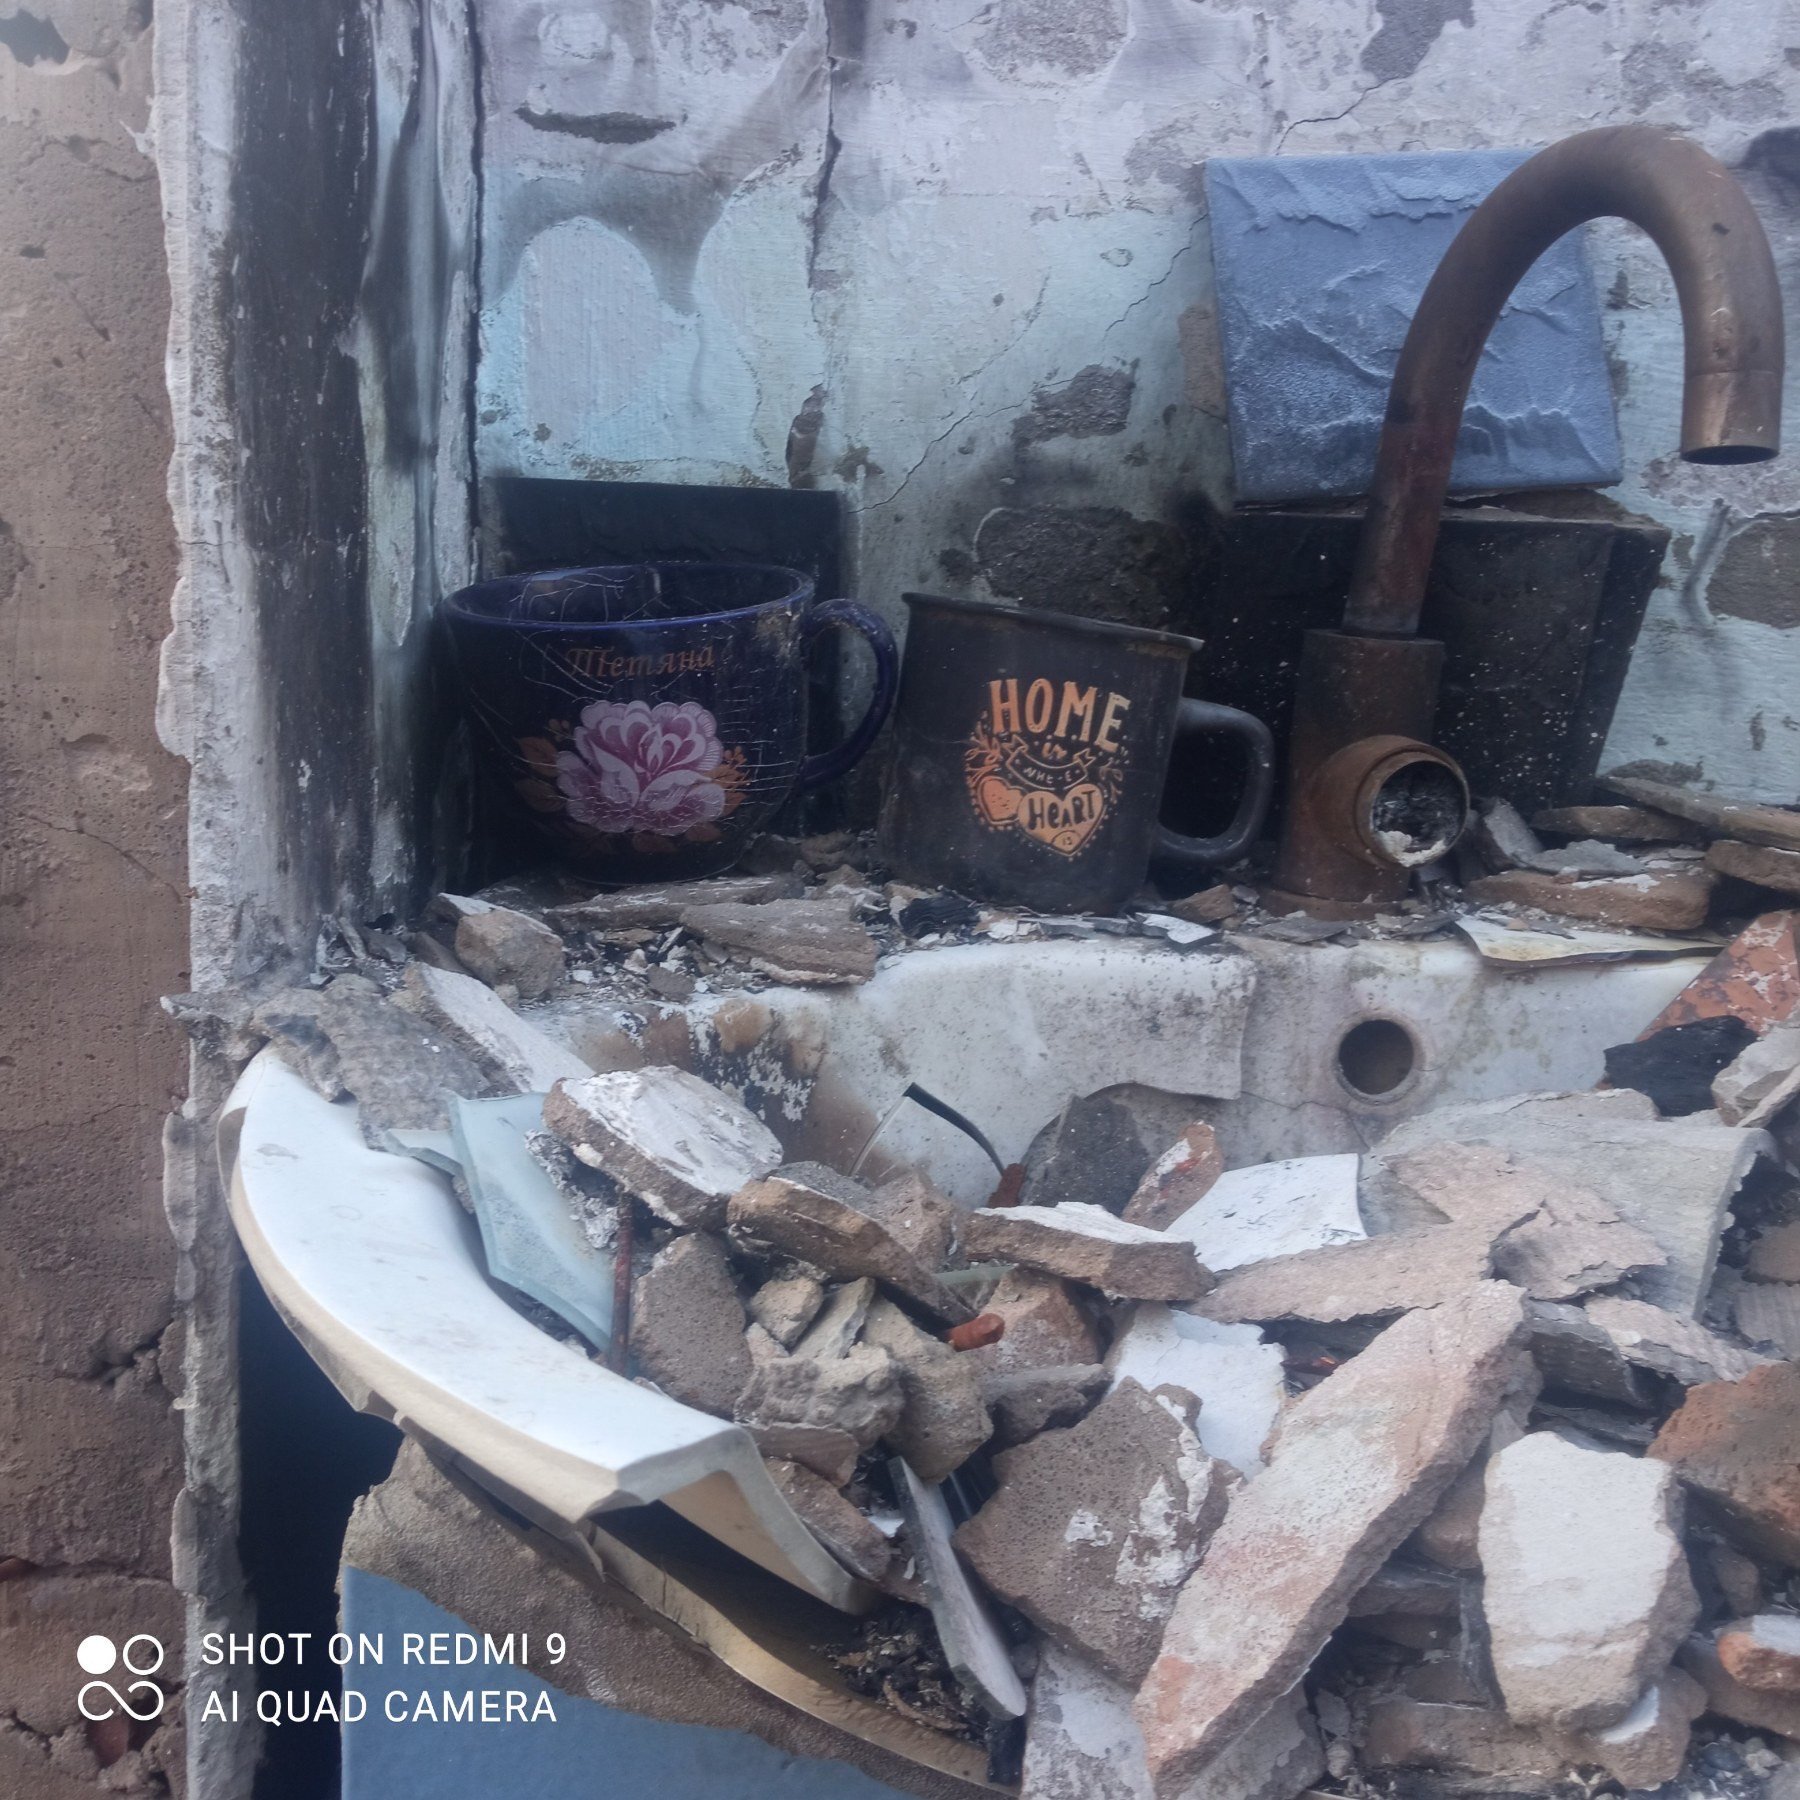 The only cup that remained whole after the house was burned out | Source: NEST project